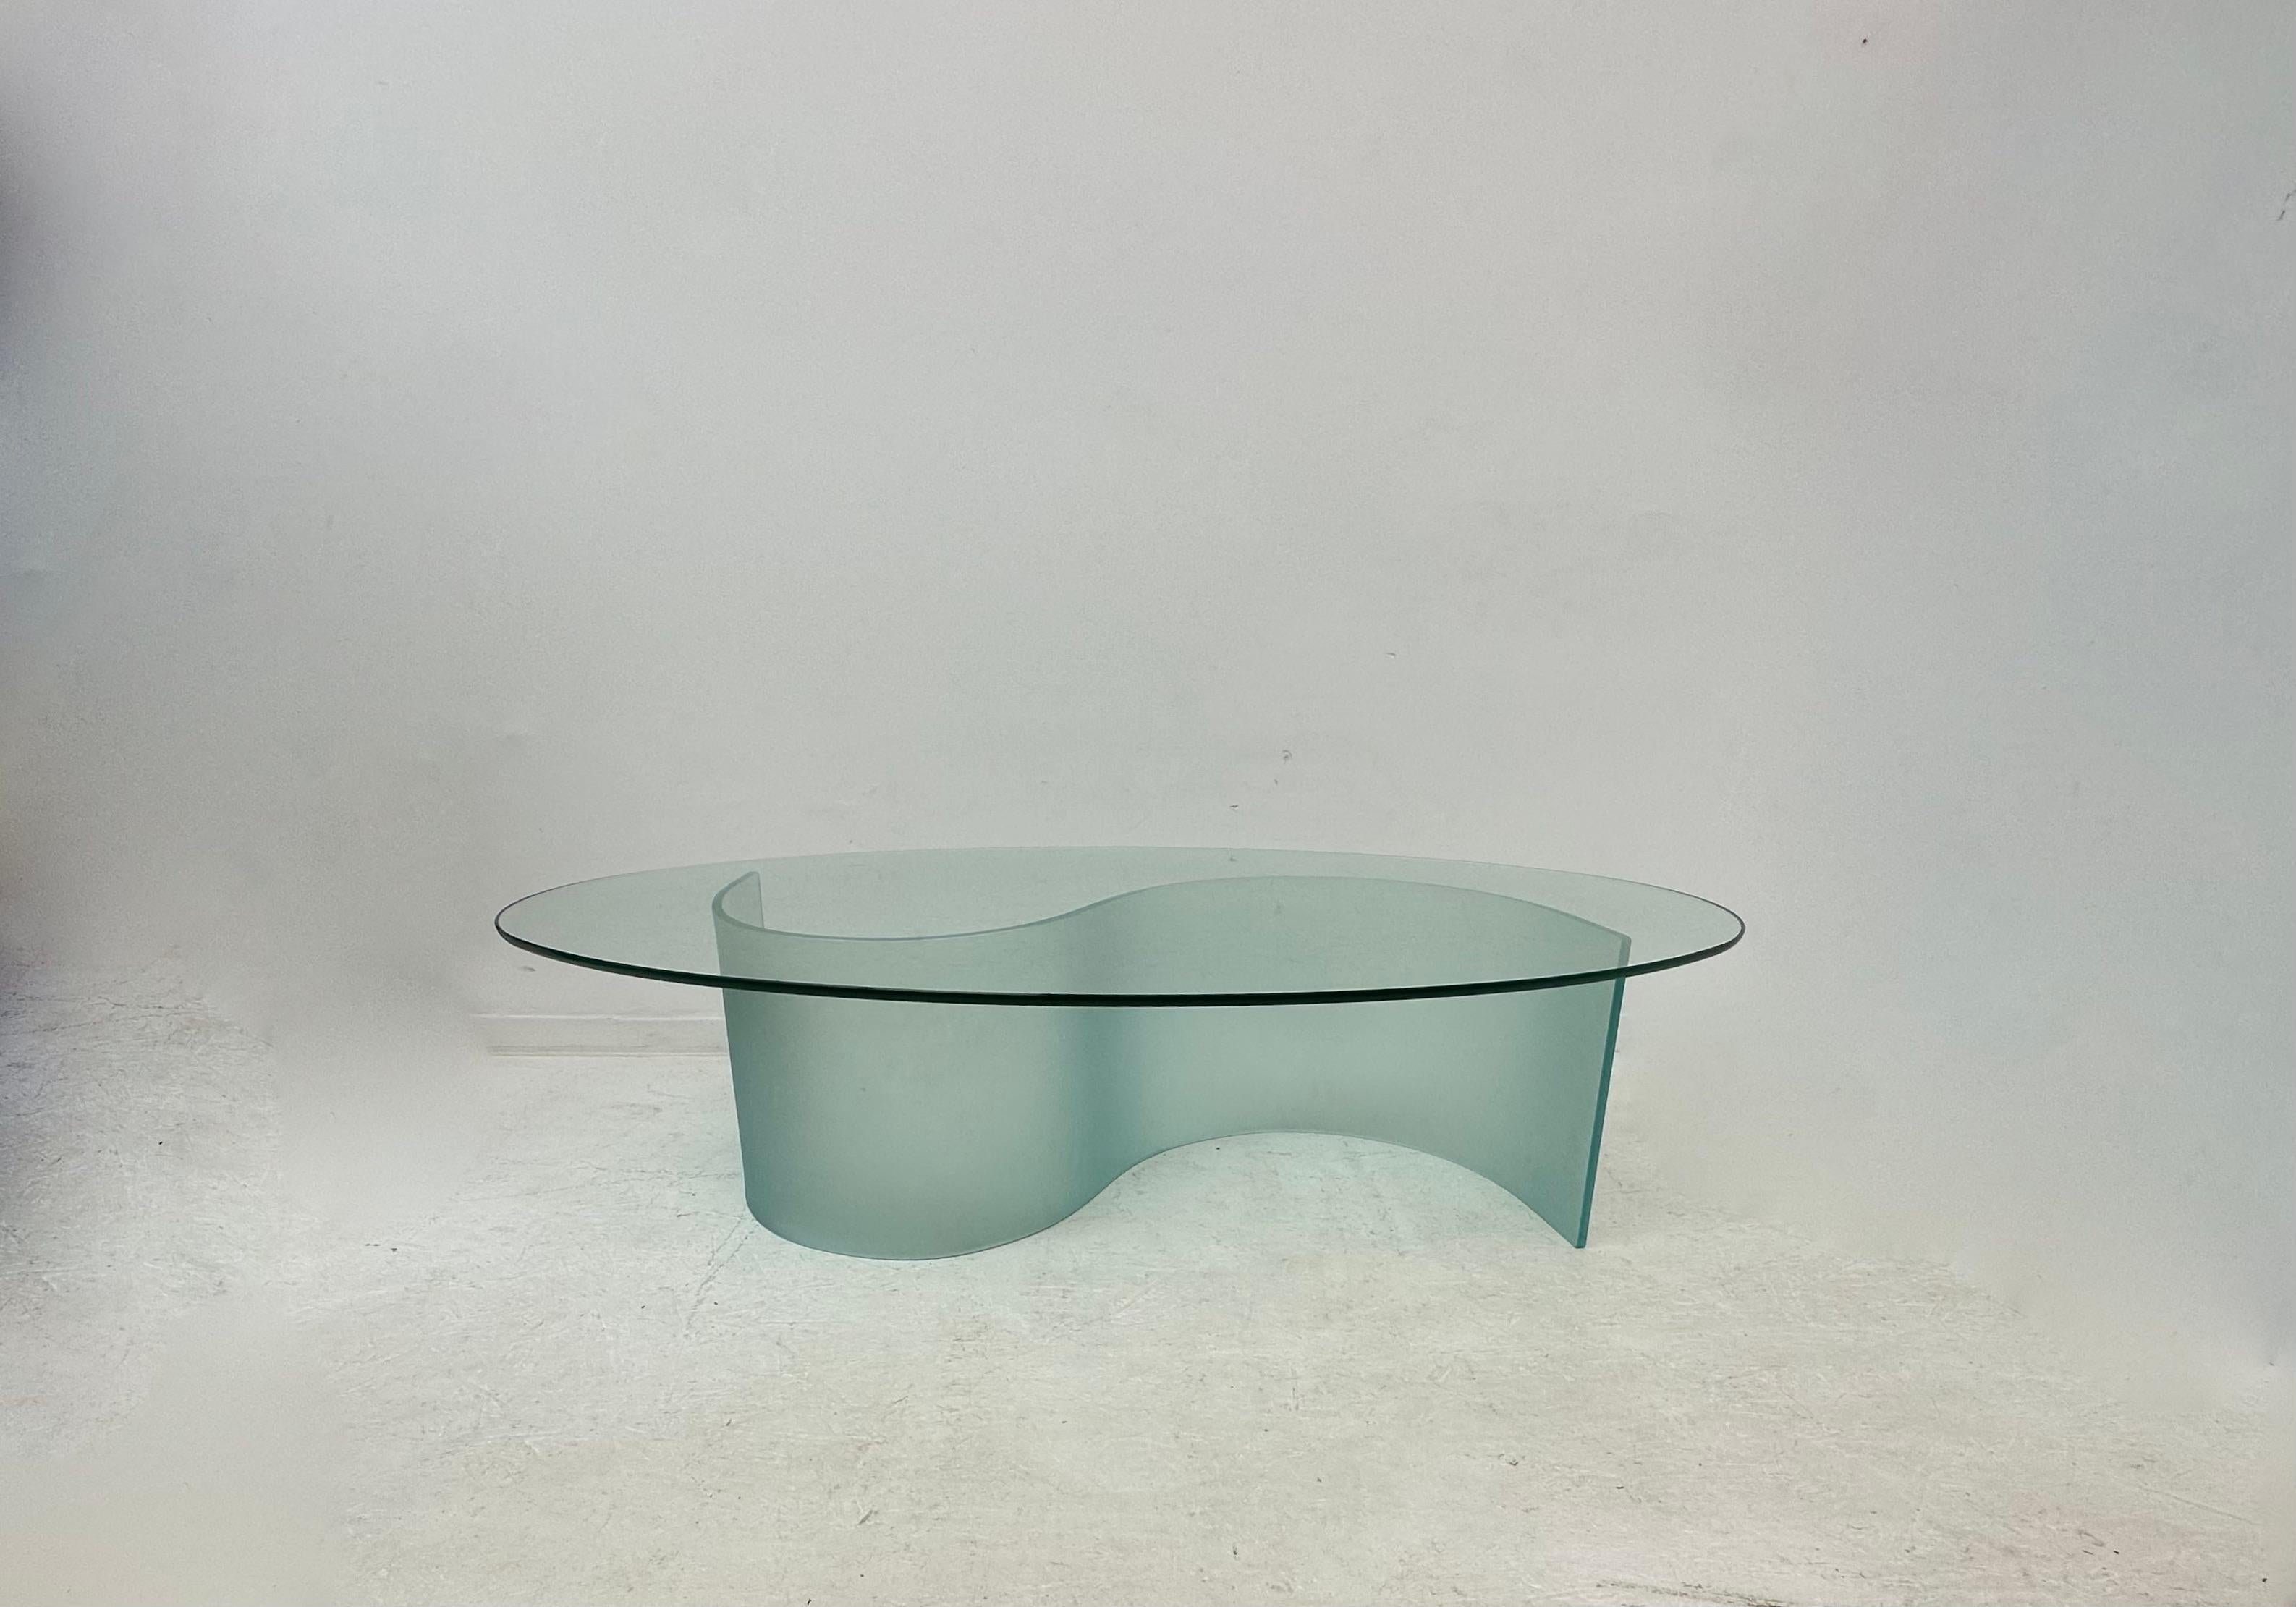 Fiam coffee table Mid-Century design , 1970’s

Dimensions: 139cm W, 80cm D, 36,5cm H
Period: 1970’s
Material: Glass
Condition: Has scratches on top part.